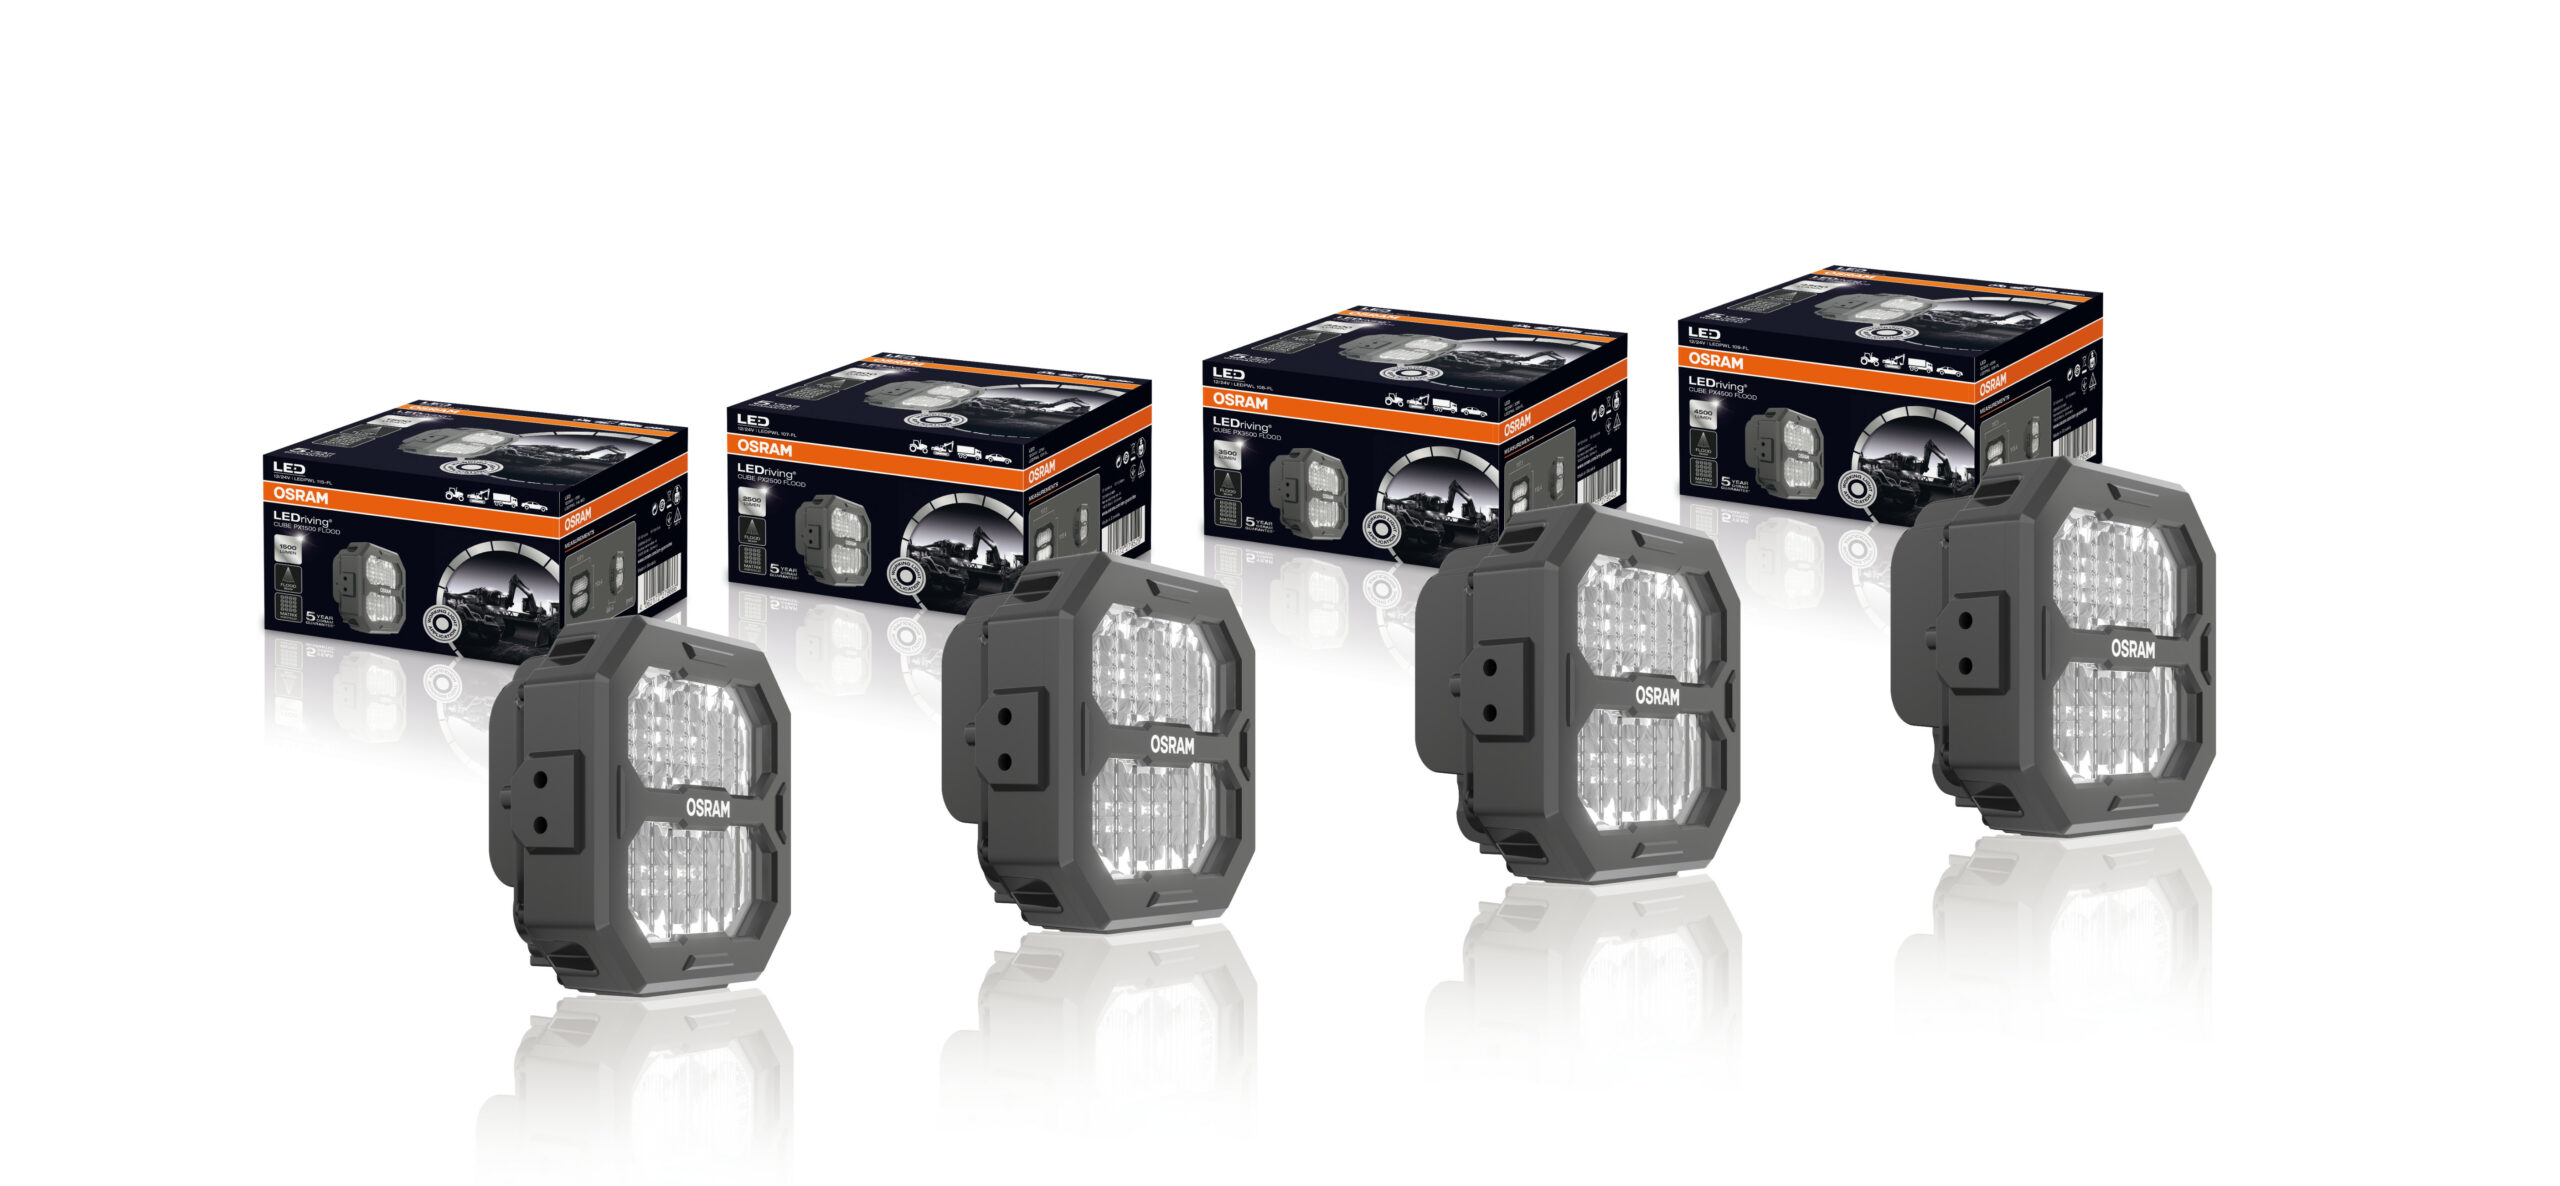 OSRAM launches its Professional Series of working lamps